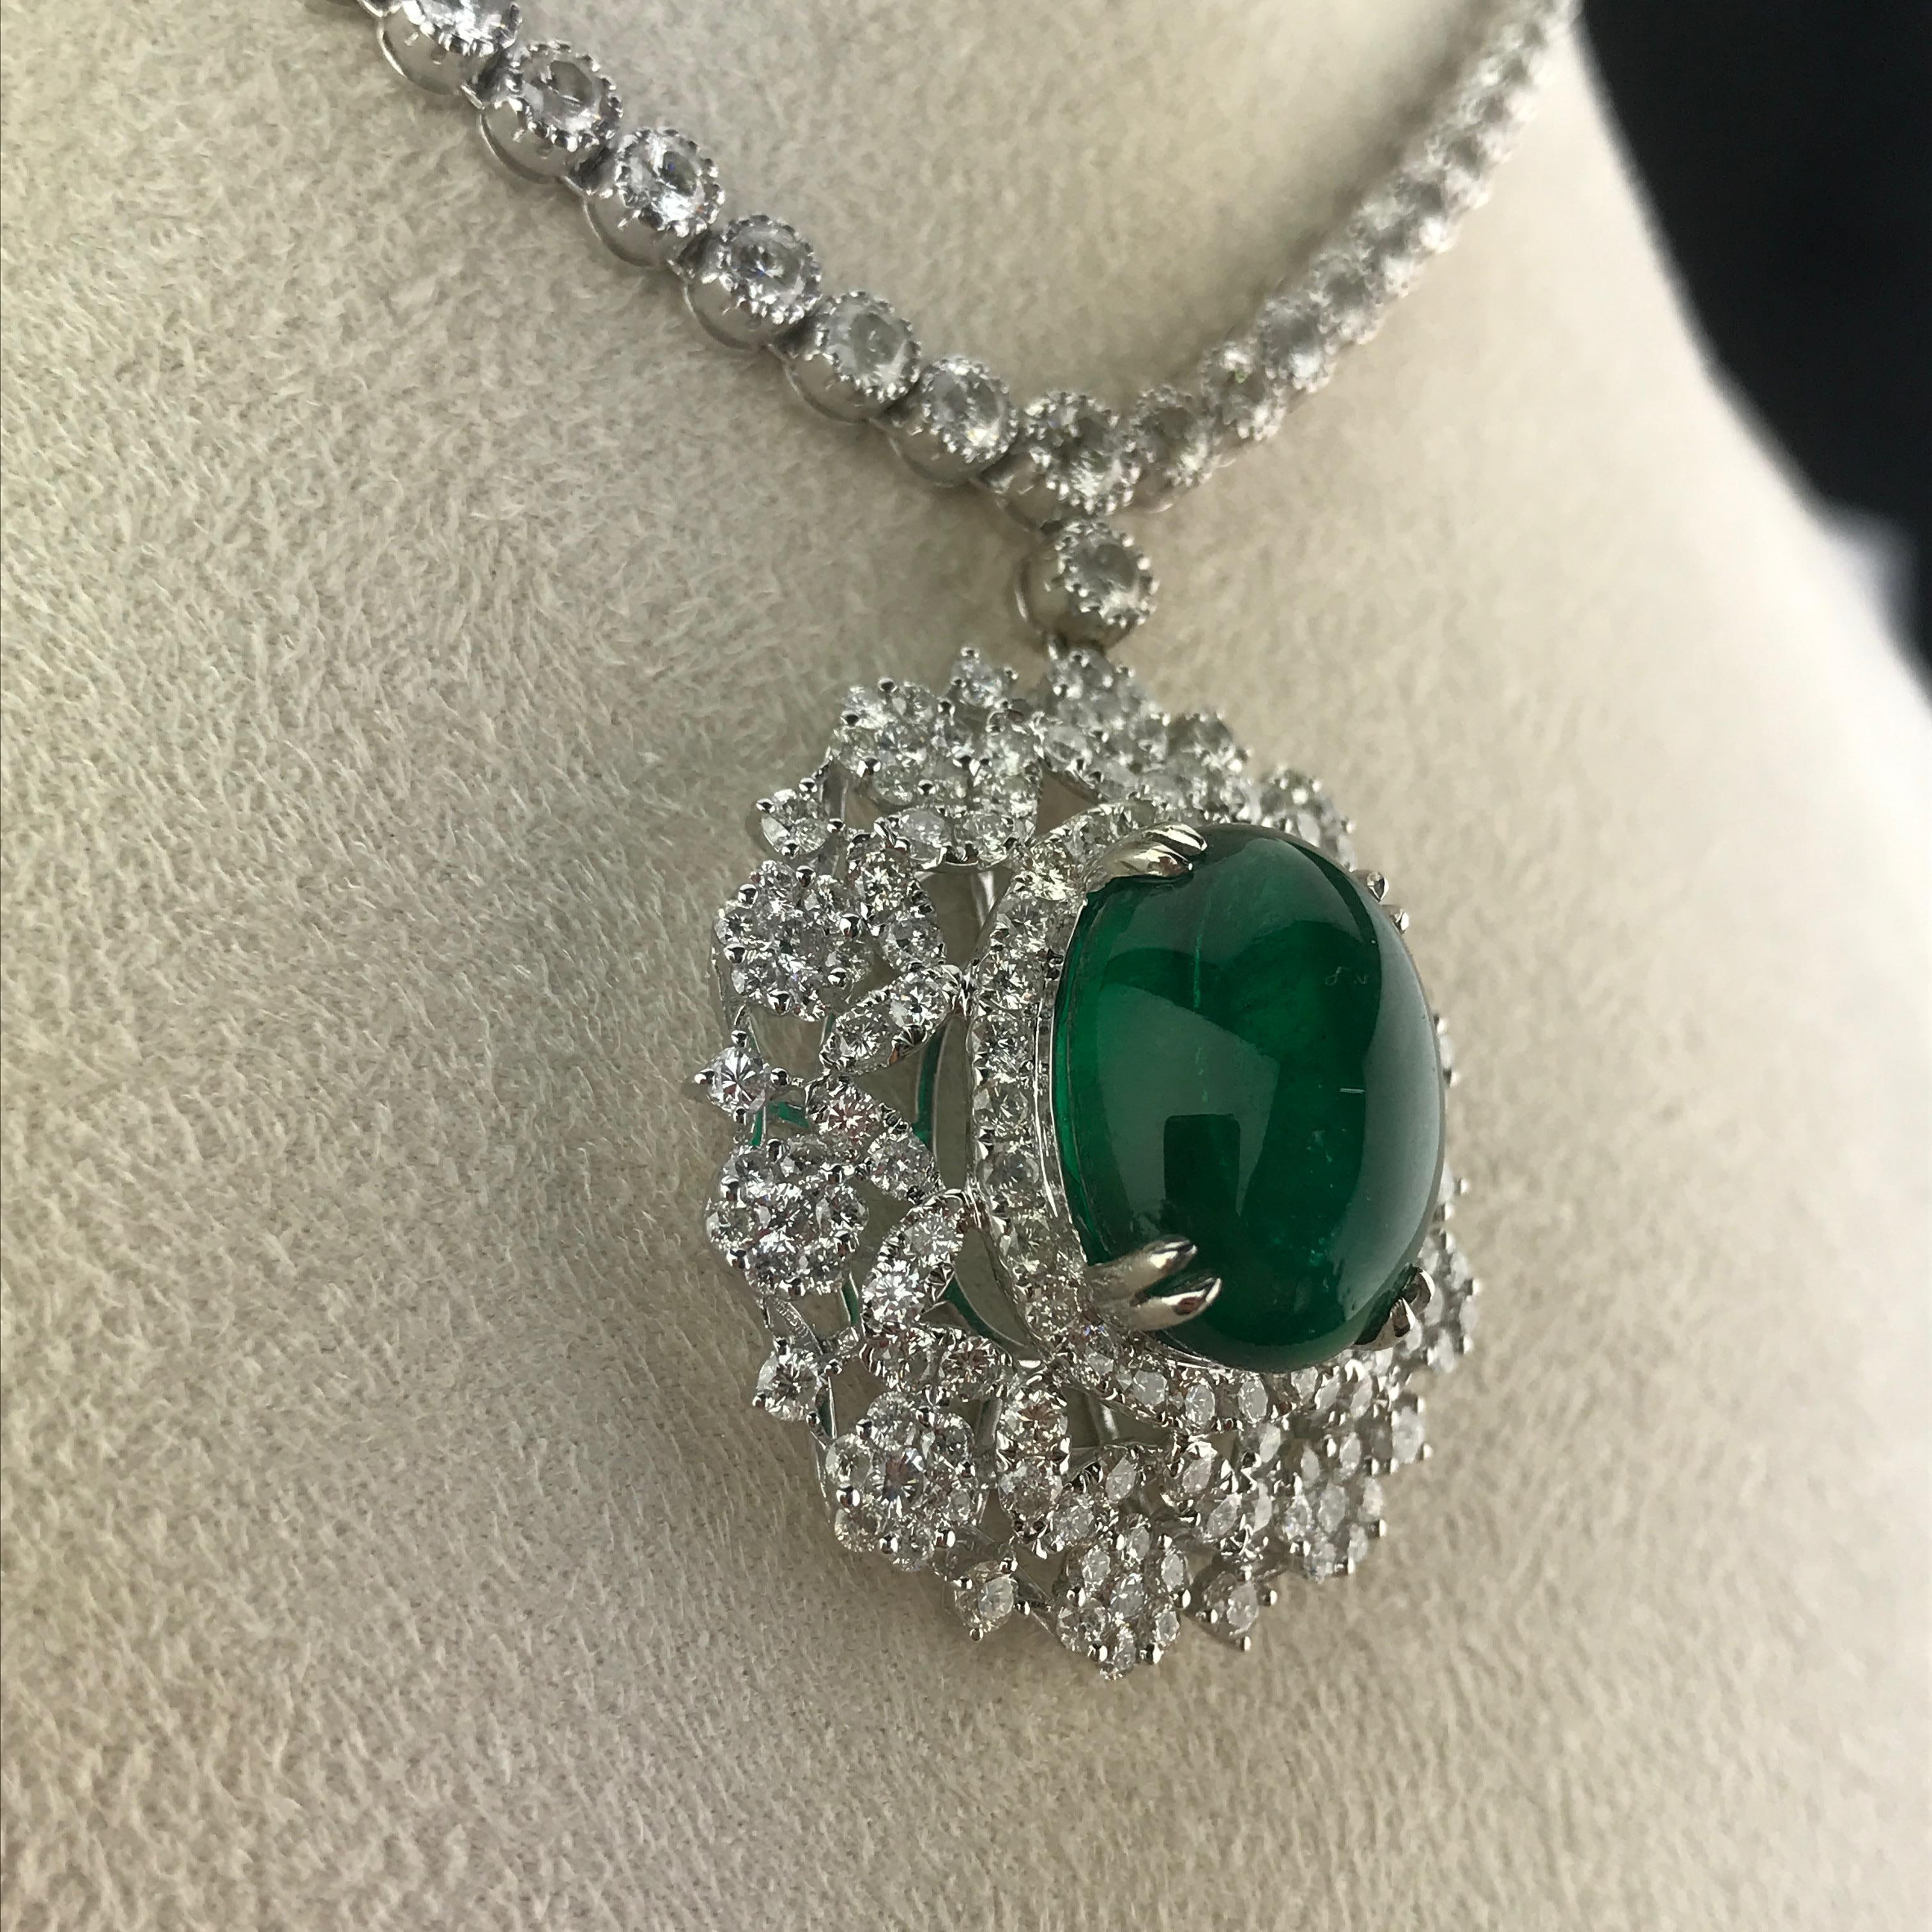 A statement necklace, with a beautiful, transparent and clean 15.03 carat Zambian Emerald  sorrounded with White Diamonds, hanging from a Diamond chain. The total necklace consists of over 11 carat of White DIamonds and is set in 18K White Gold. A